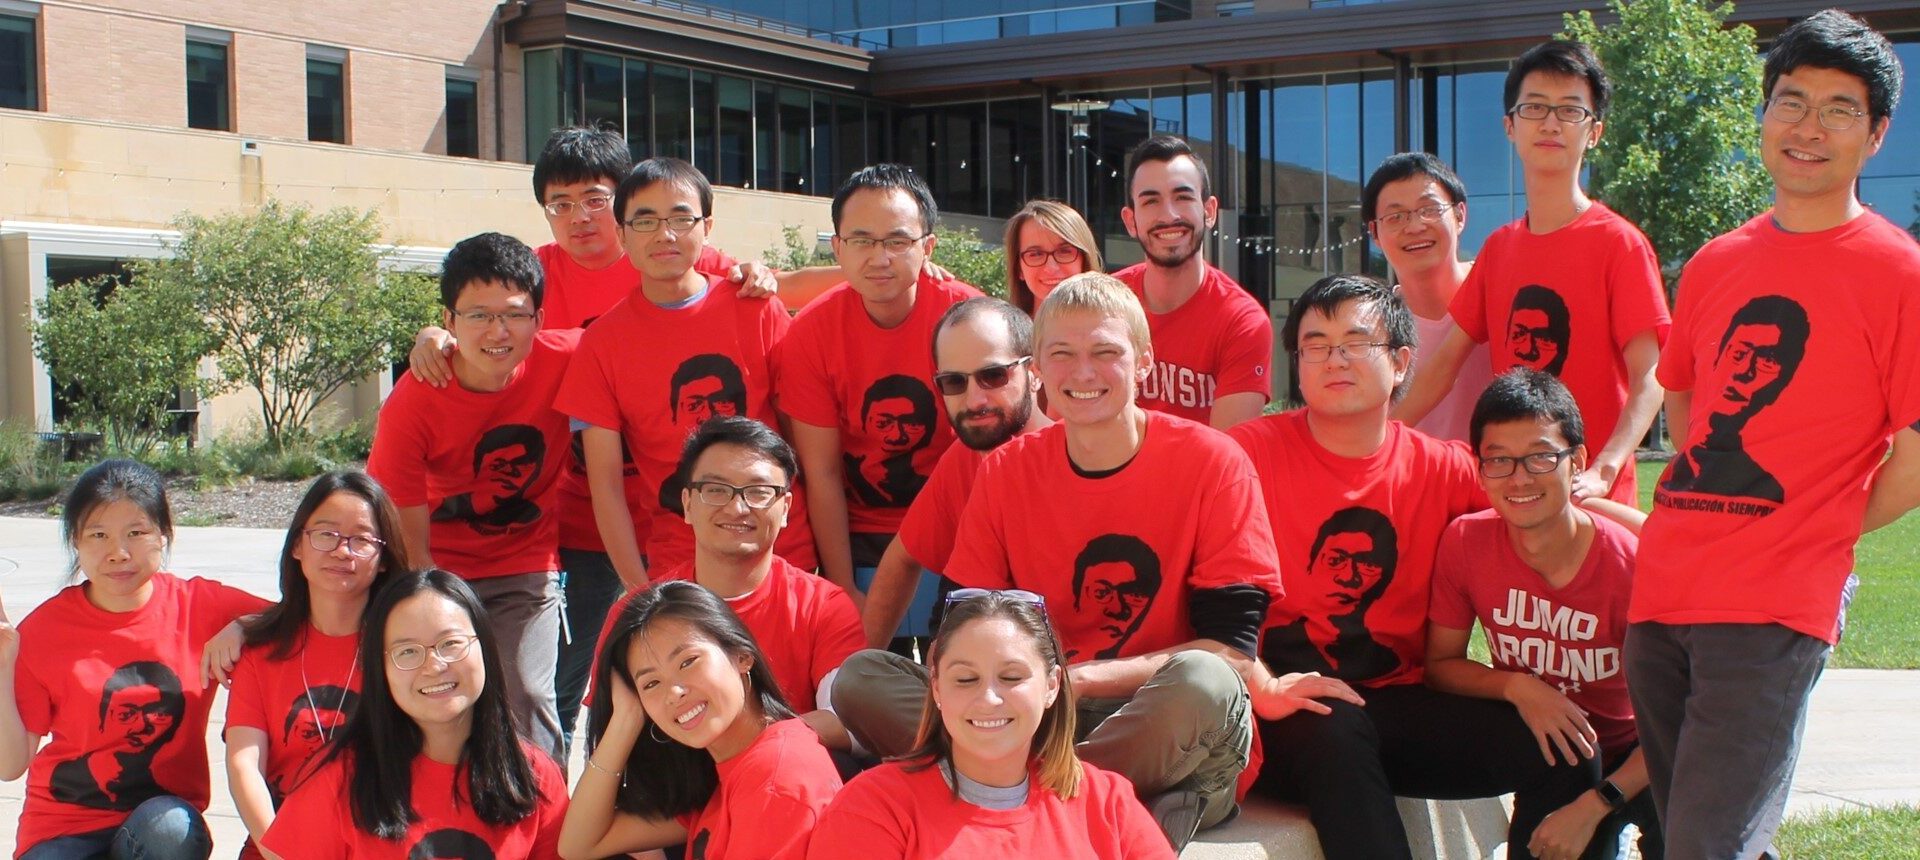 Tang Research members all wearing matching red shirts with Prof. Tang printed on the front